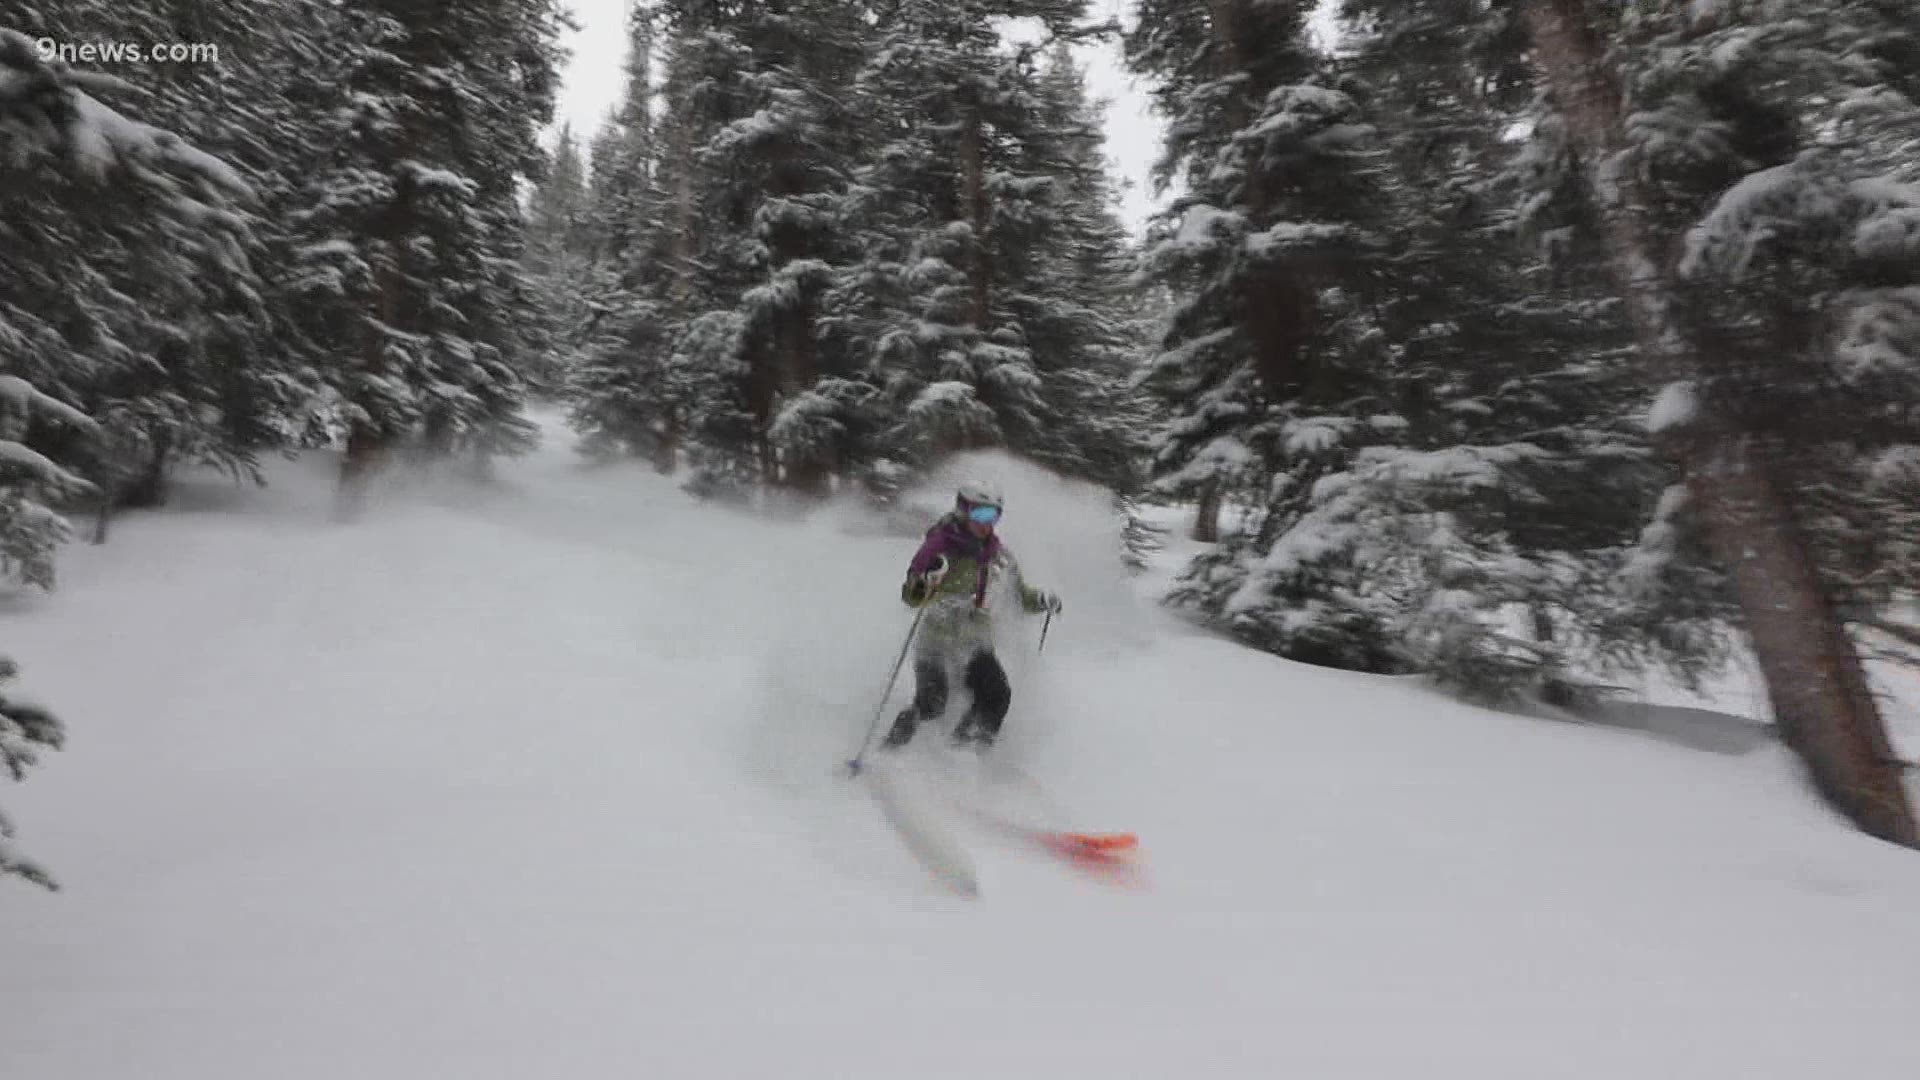 Ski season in Colorado begins when Wolf Creek Ski Area opens Wednesday morning after the weekend storm blasted the area with 24 inches of fresh powder.